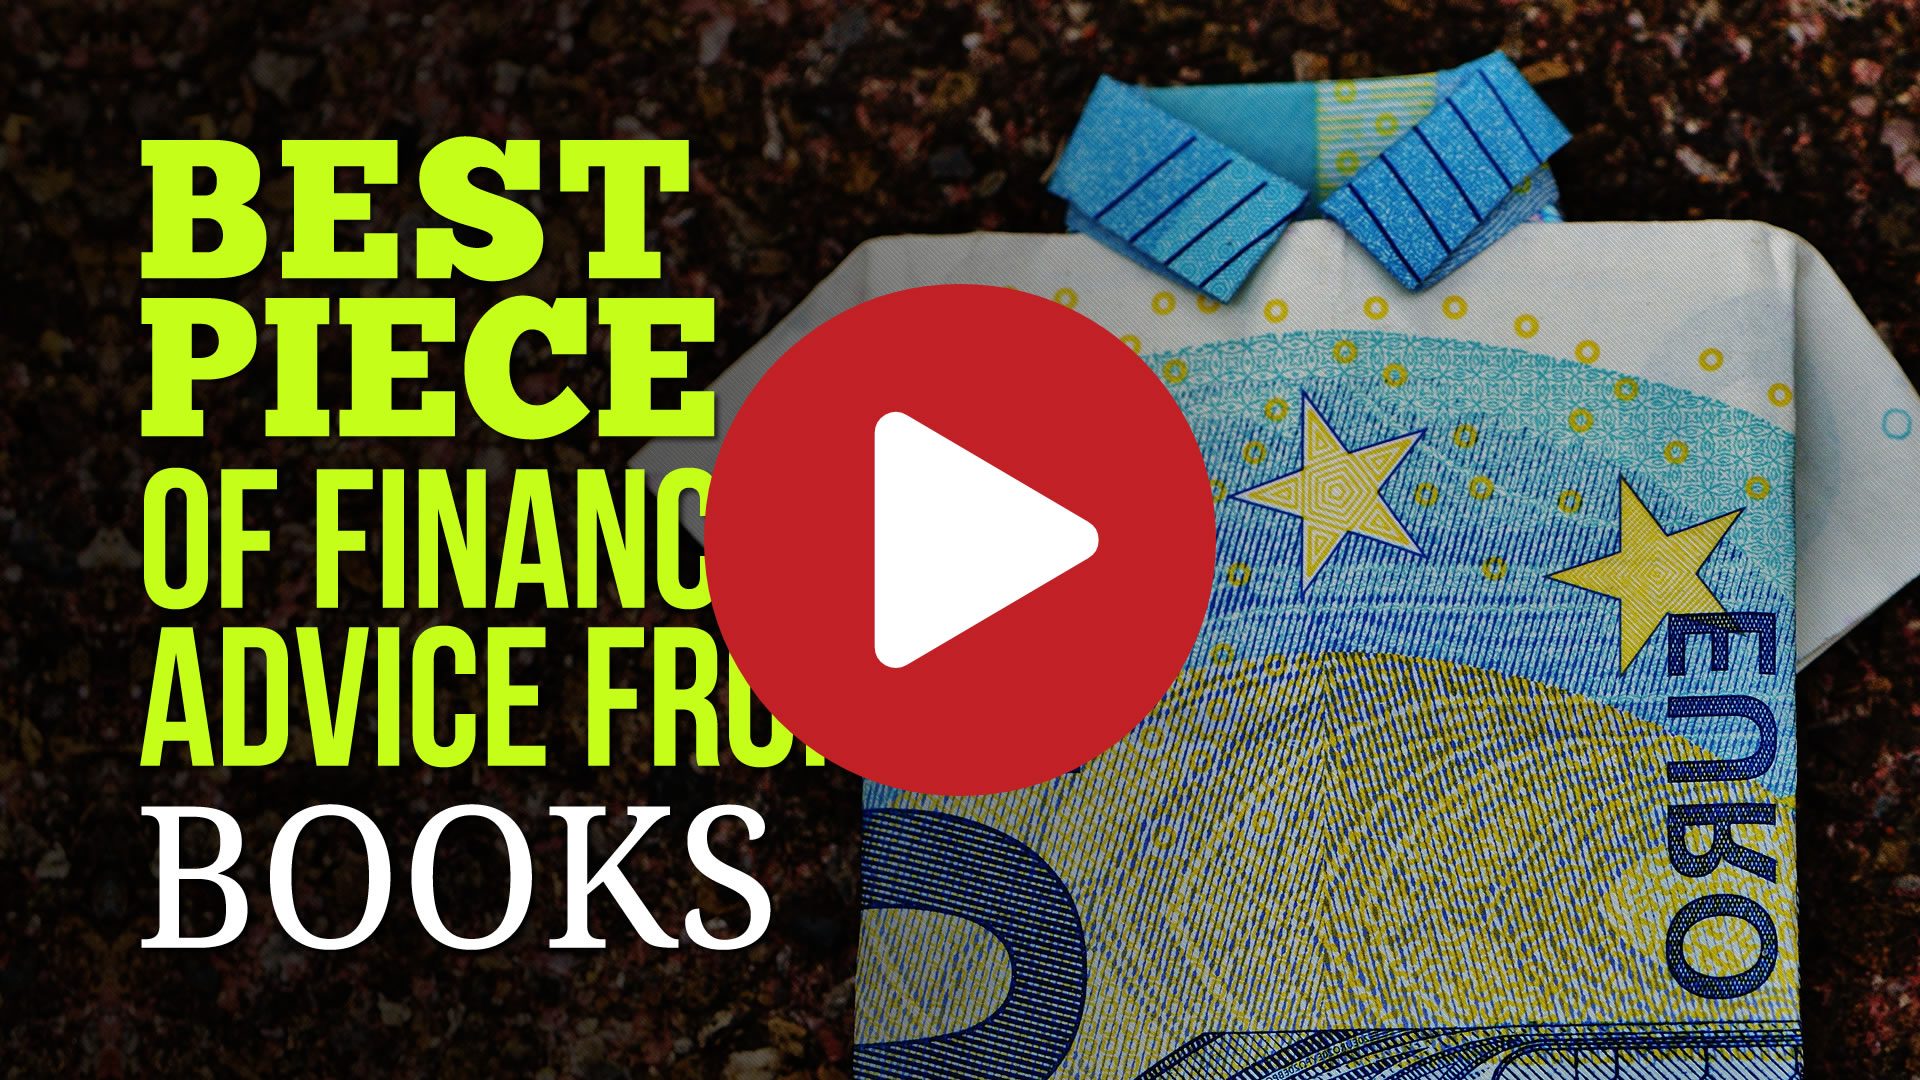 Best Piece of Financial Advice from Books - 20 Best Nuggest of Financial Widsom